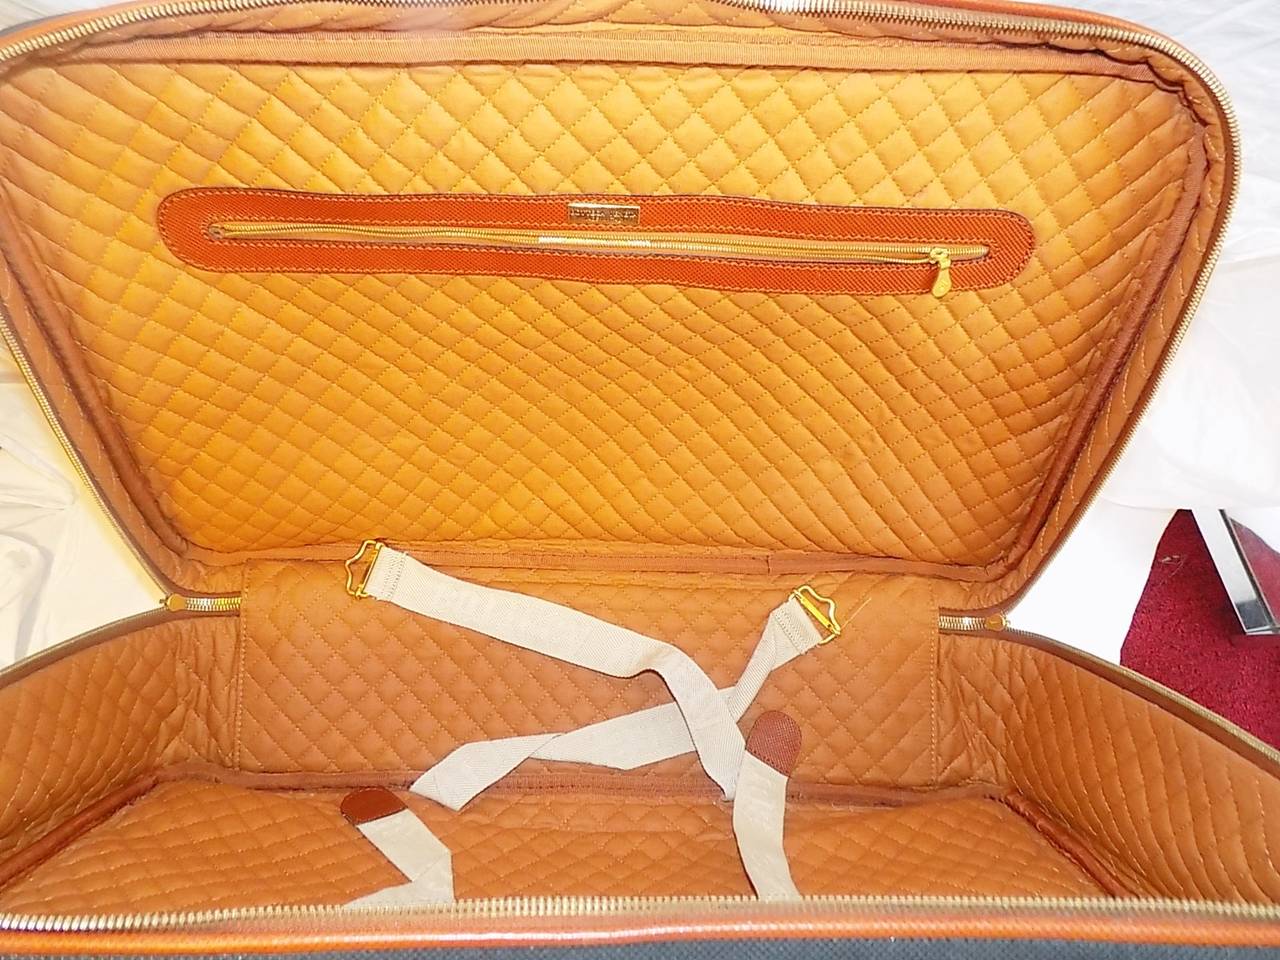 marco polo luggage bags